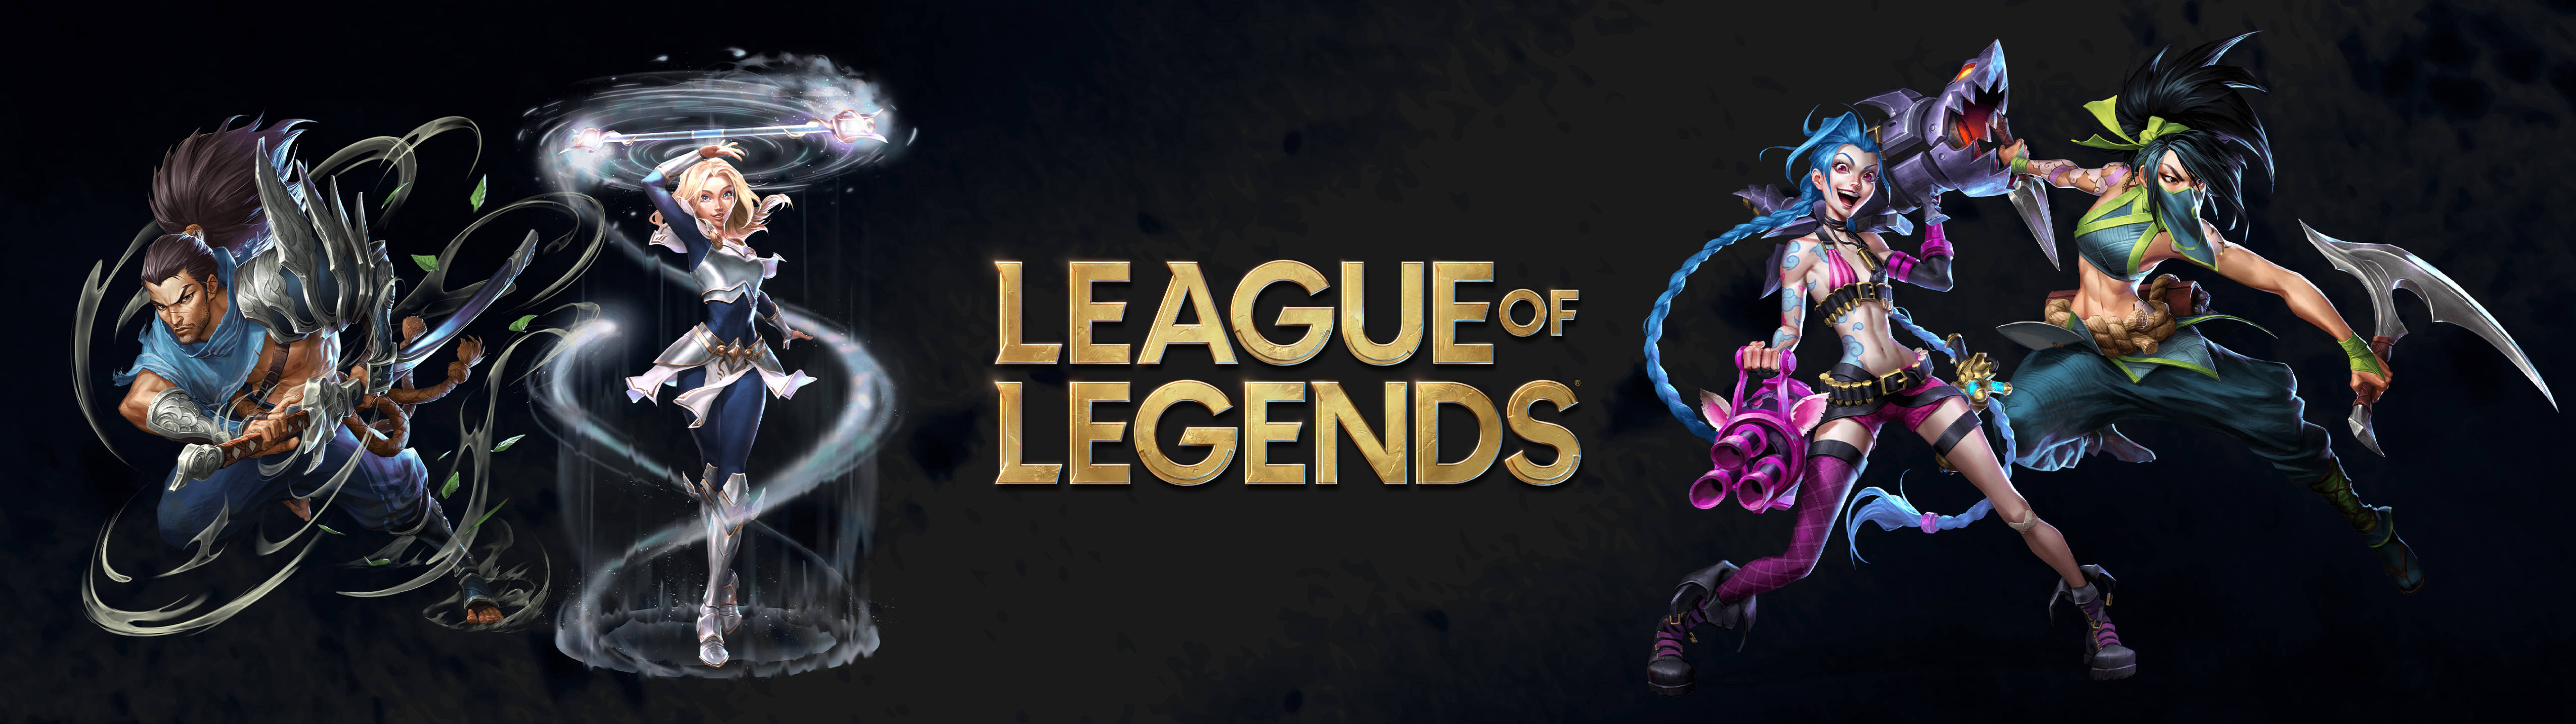 League Of Legends 5120x1440 Gaming Background